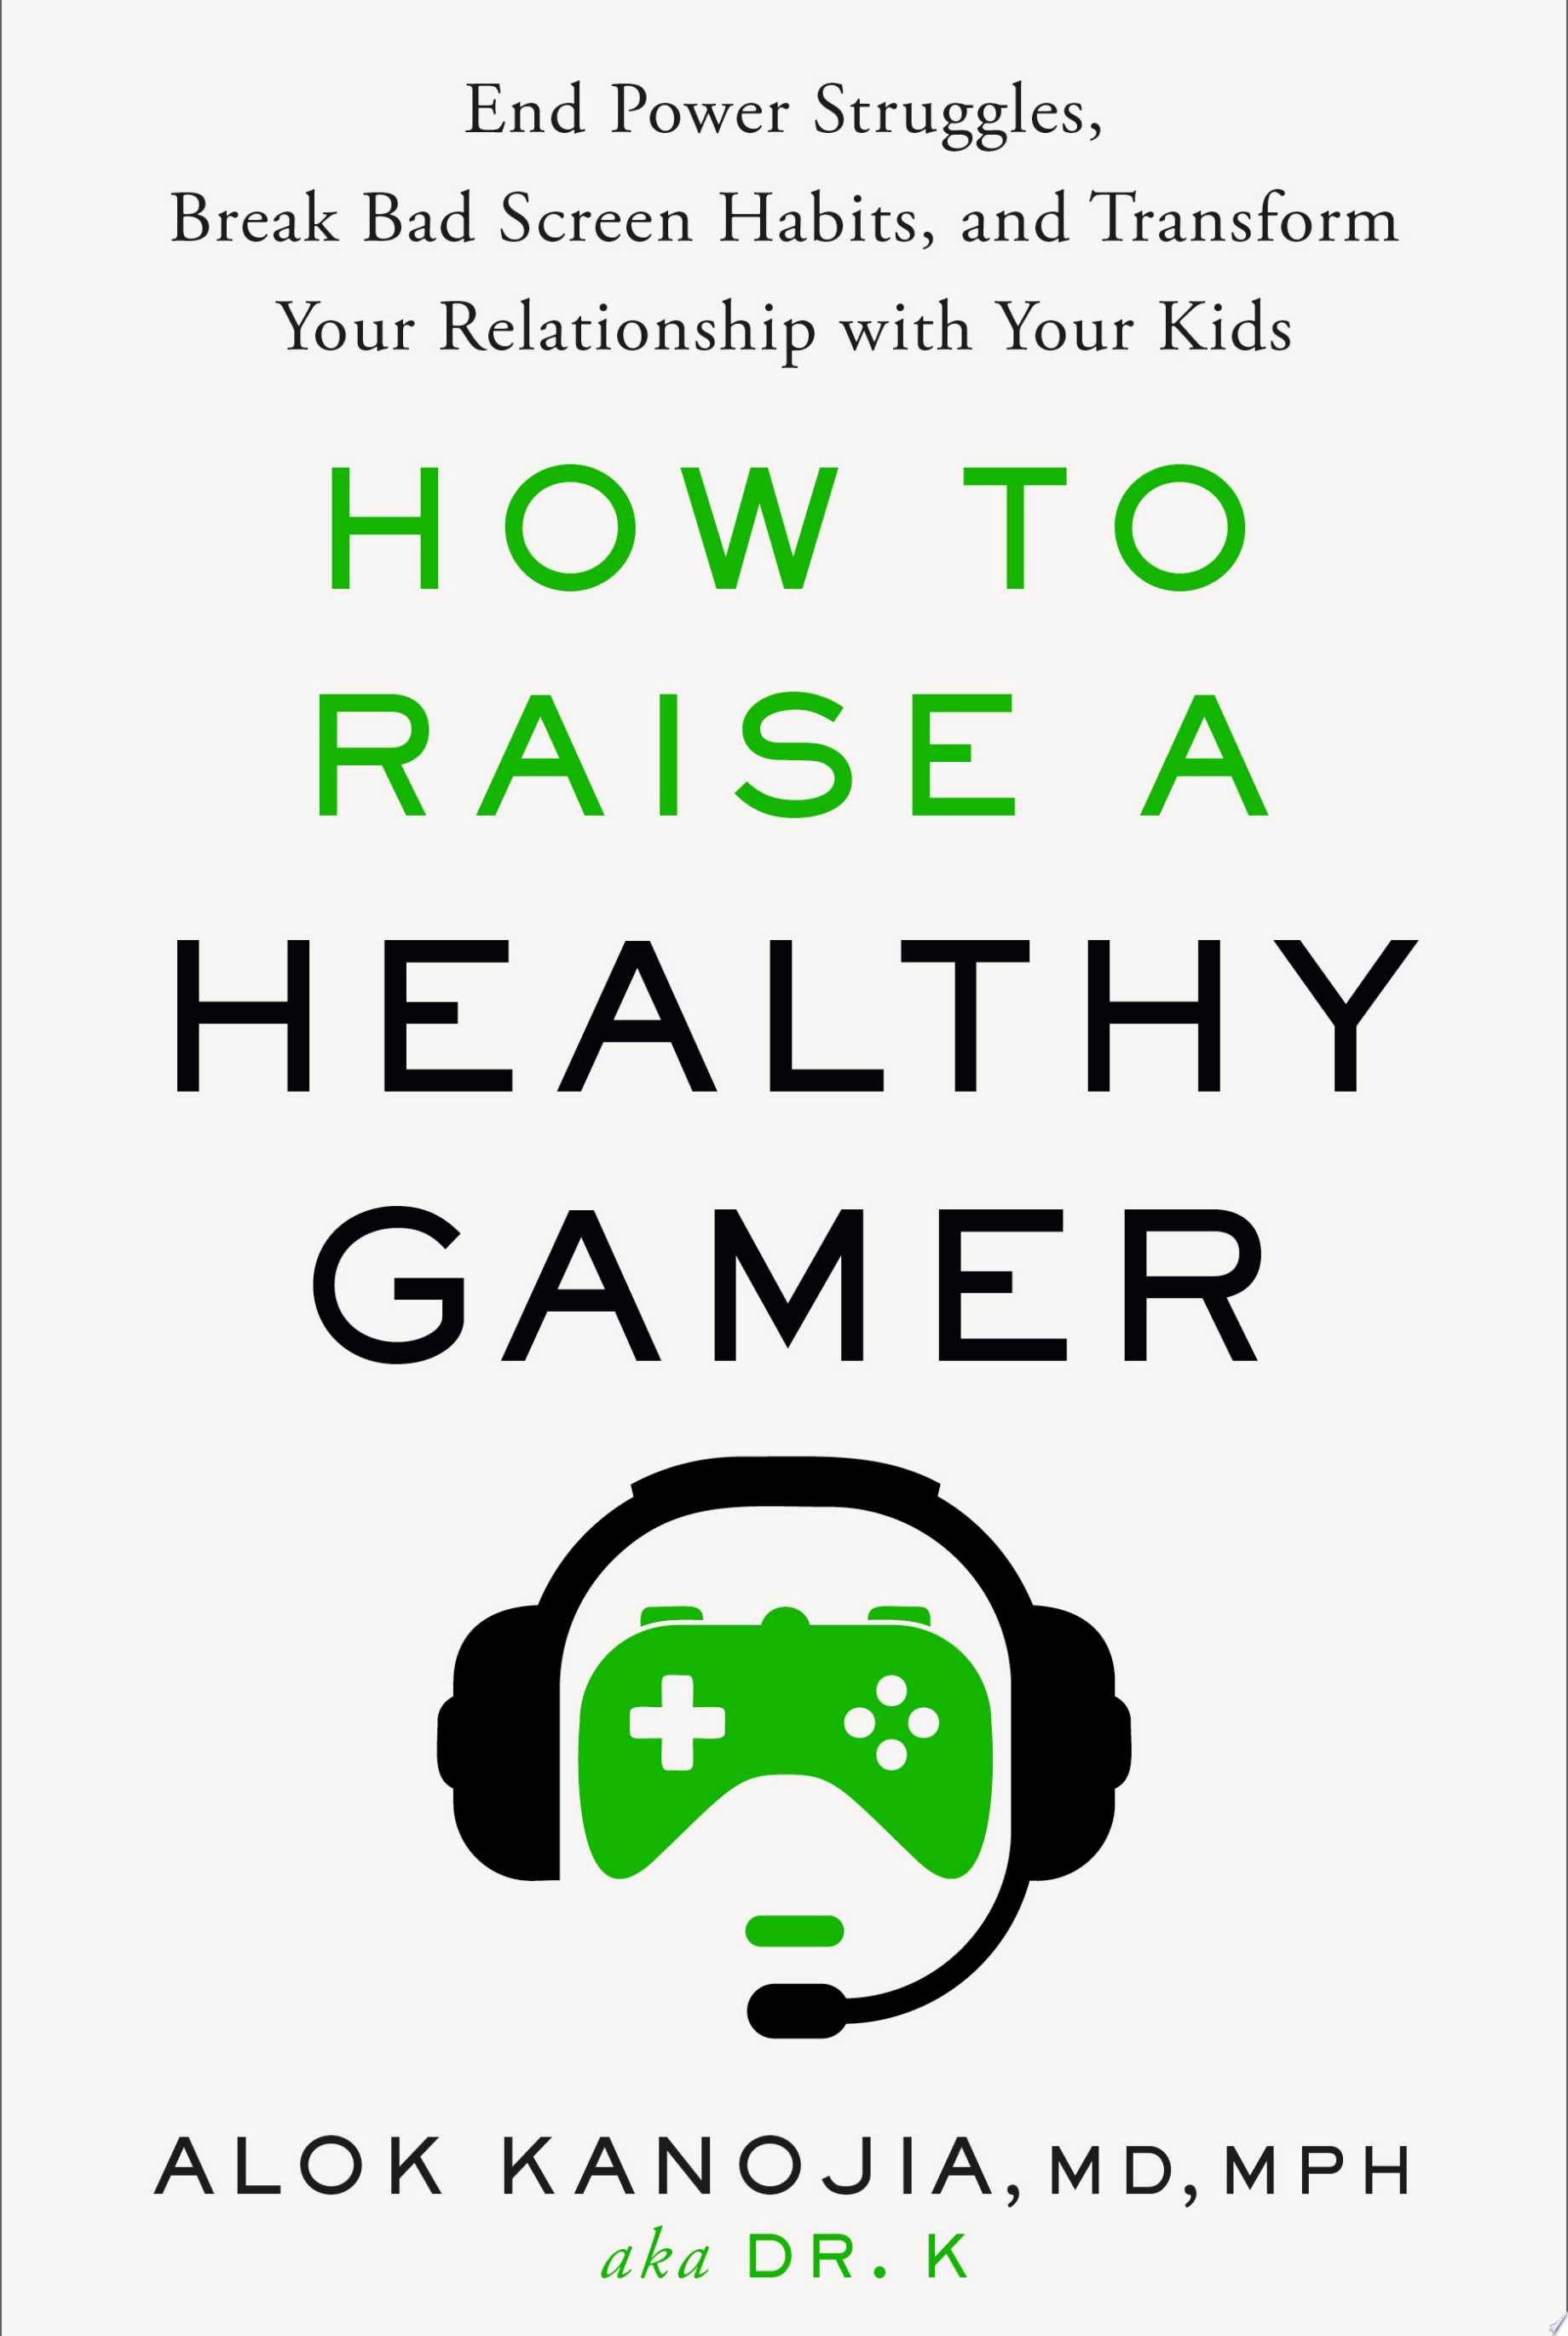 Image for "How to Raise a Healthy Gamer"